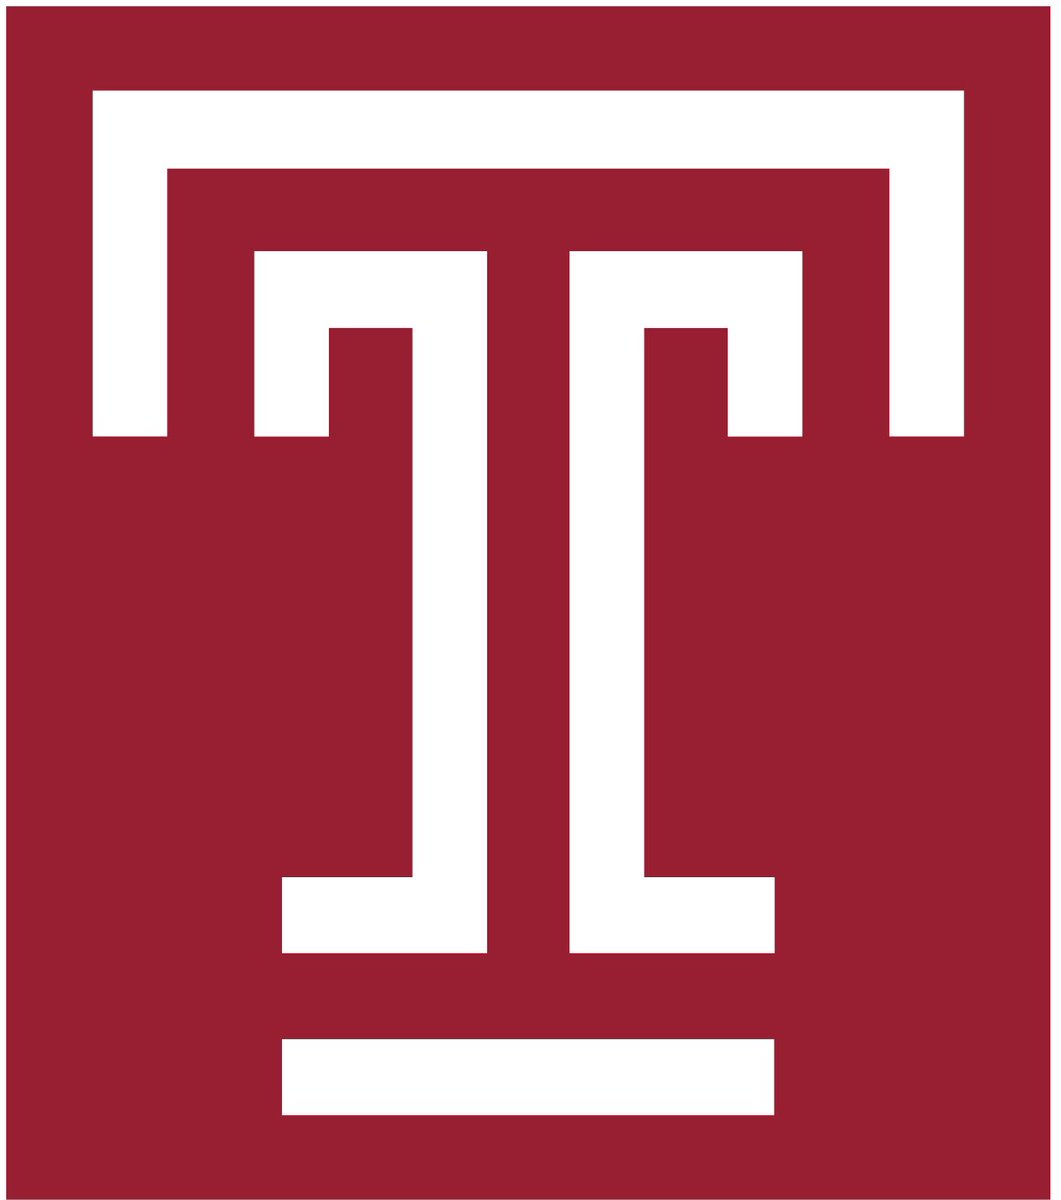 Blessed to receive my 1st Division 1 offer from Temple University via Coach @Dbowman85 @J_Nelson1 @STA_Football @CoachHarriott @Stevo365_